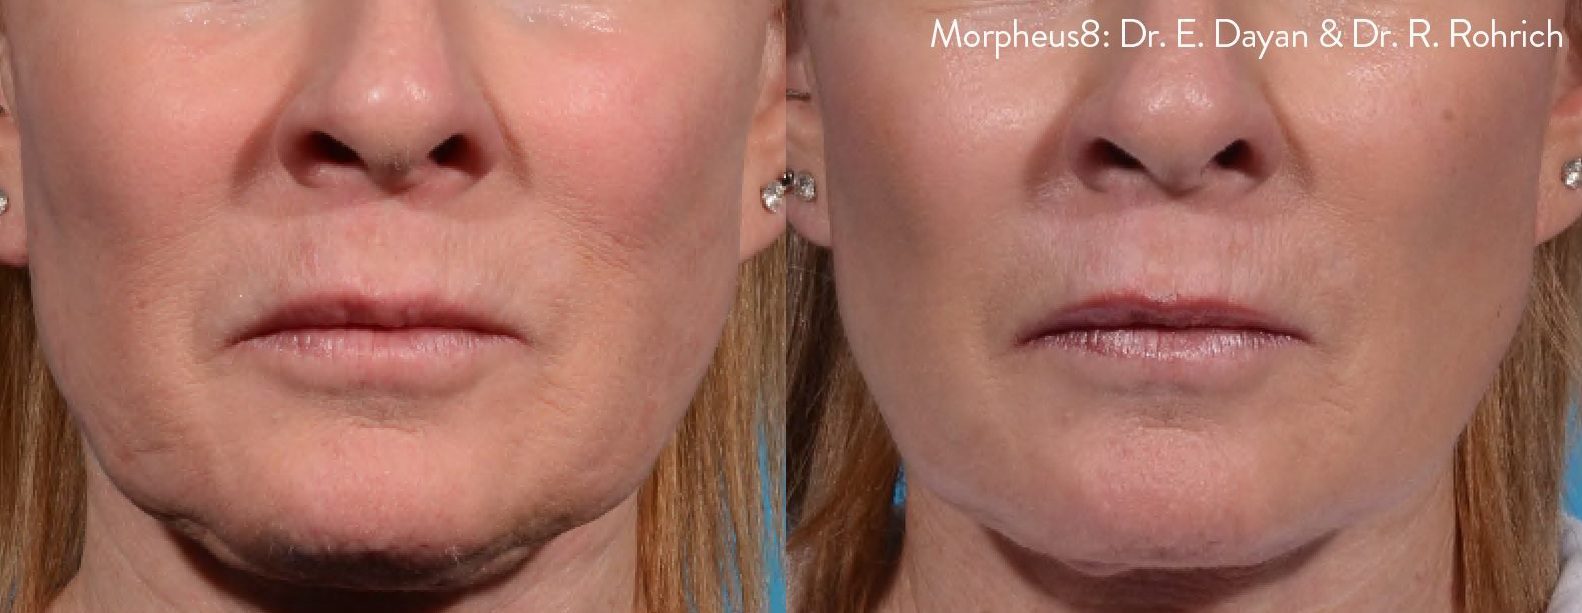 morpheus8 skin tightening lip lines jowls before and after